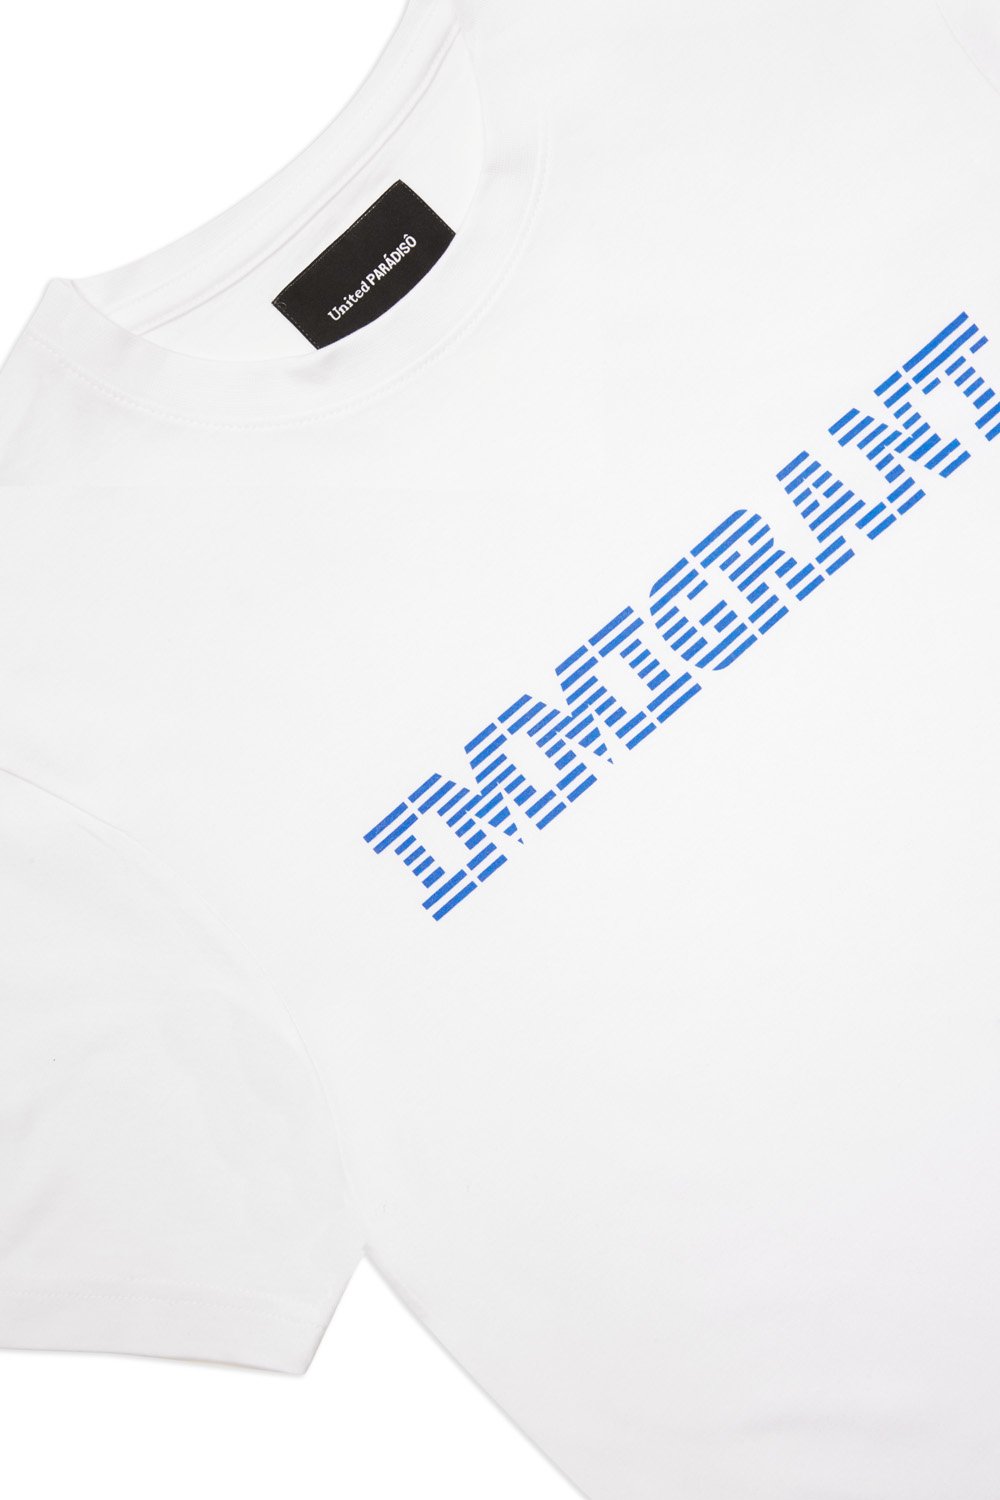 Load image into Gallery viewer, Paradiso White Immigrant Short-Sleeved Supima Charity T-Shirt Front Detail